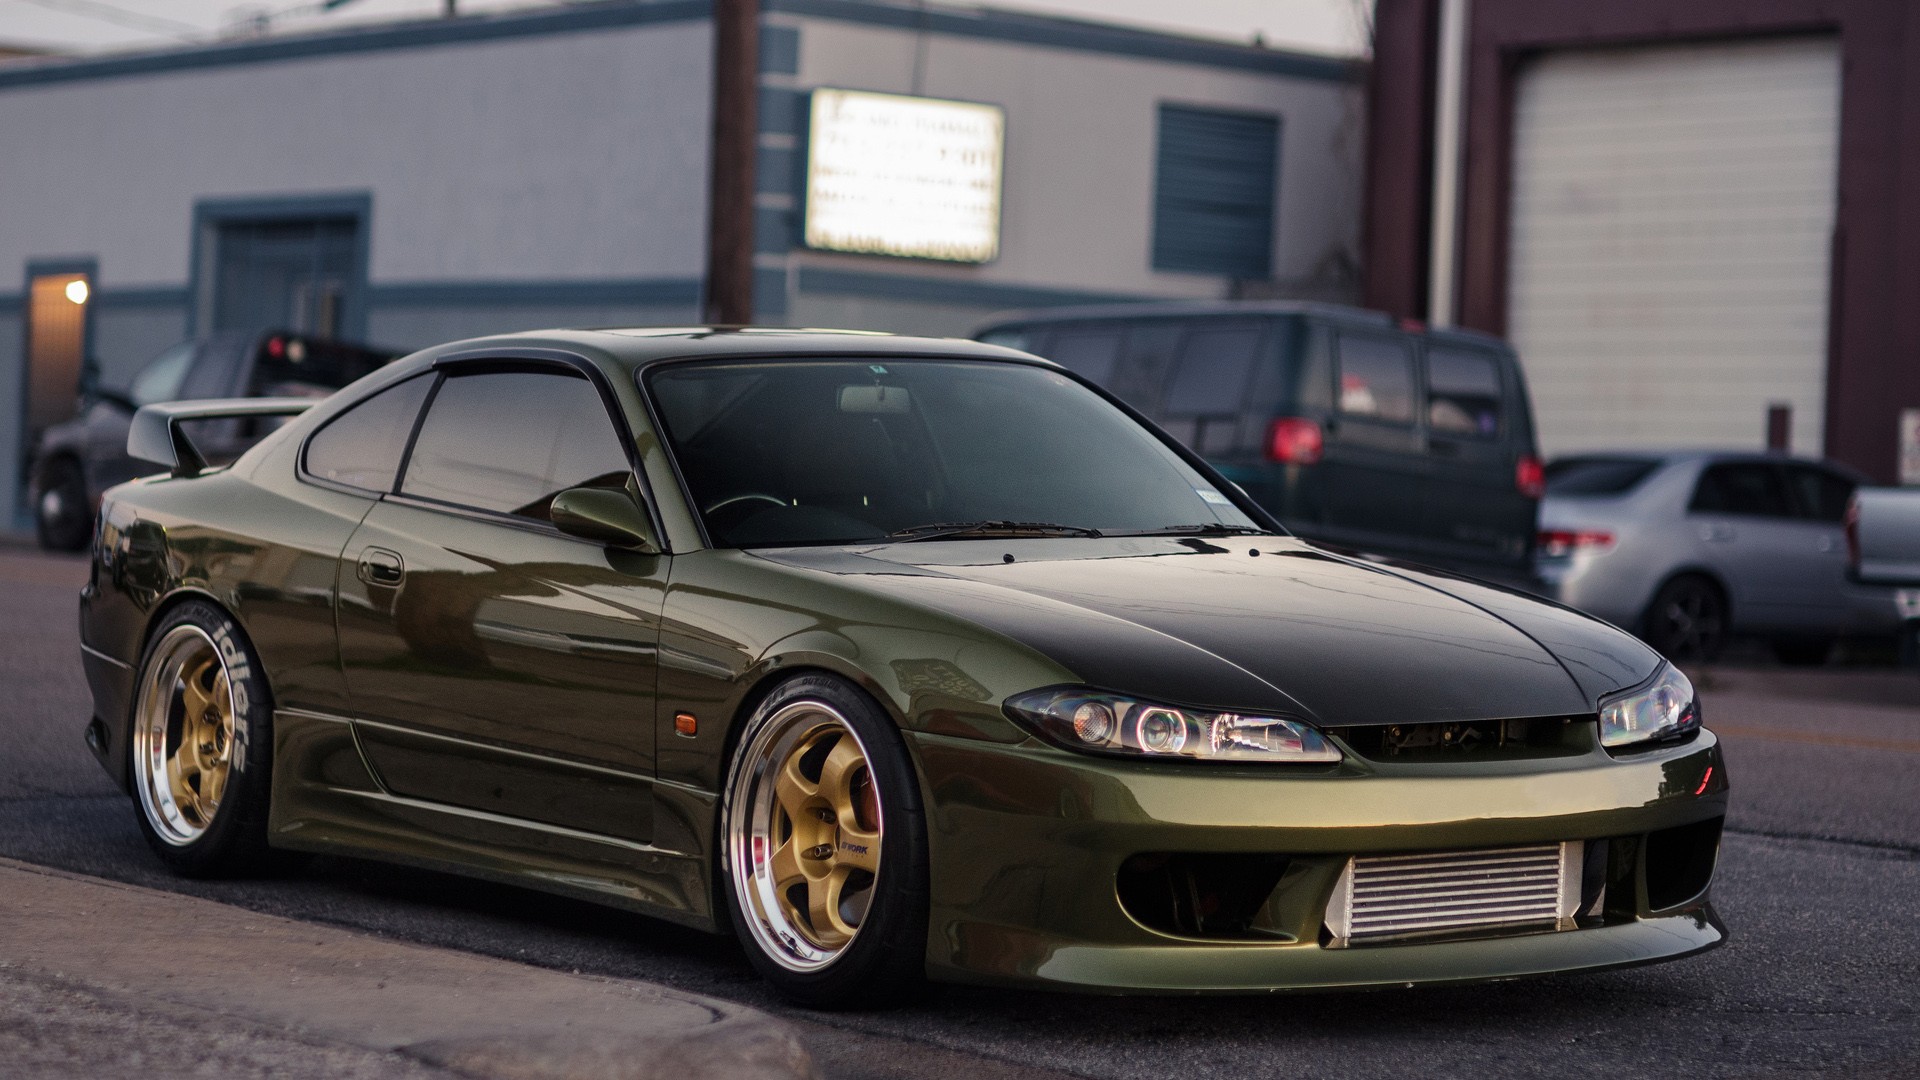 Nissan, Silvia S15, JDM, Car, S15 Wallpapers HD / Desktop and Mobile Backgrounds